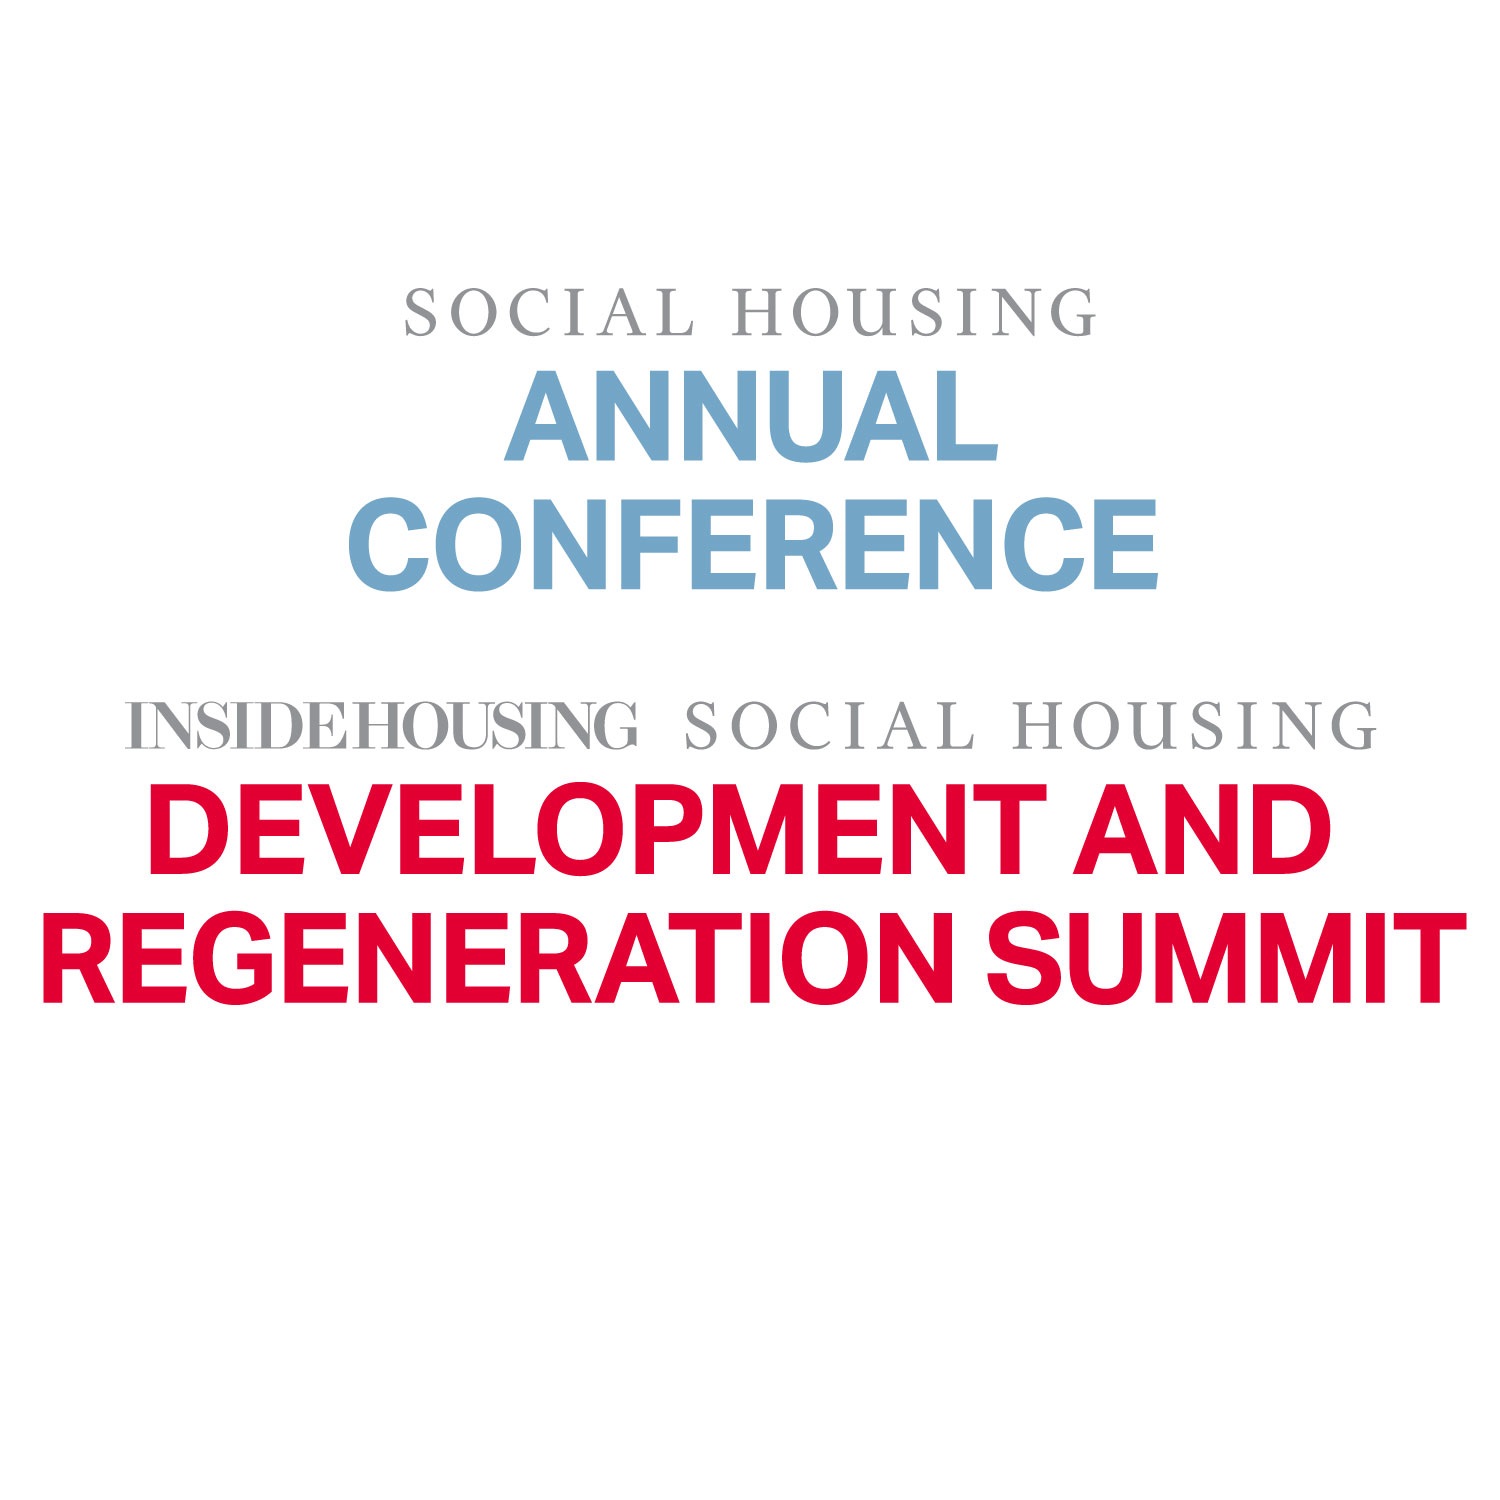 Social Housing Annual Conference and Development and Regeneration Summit